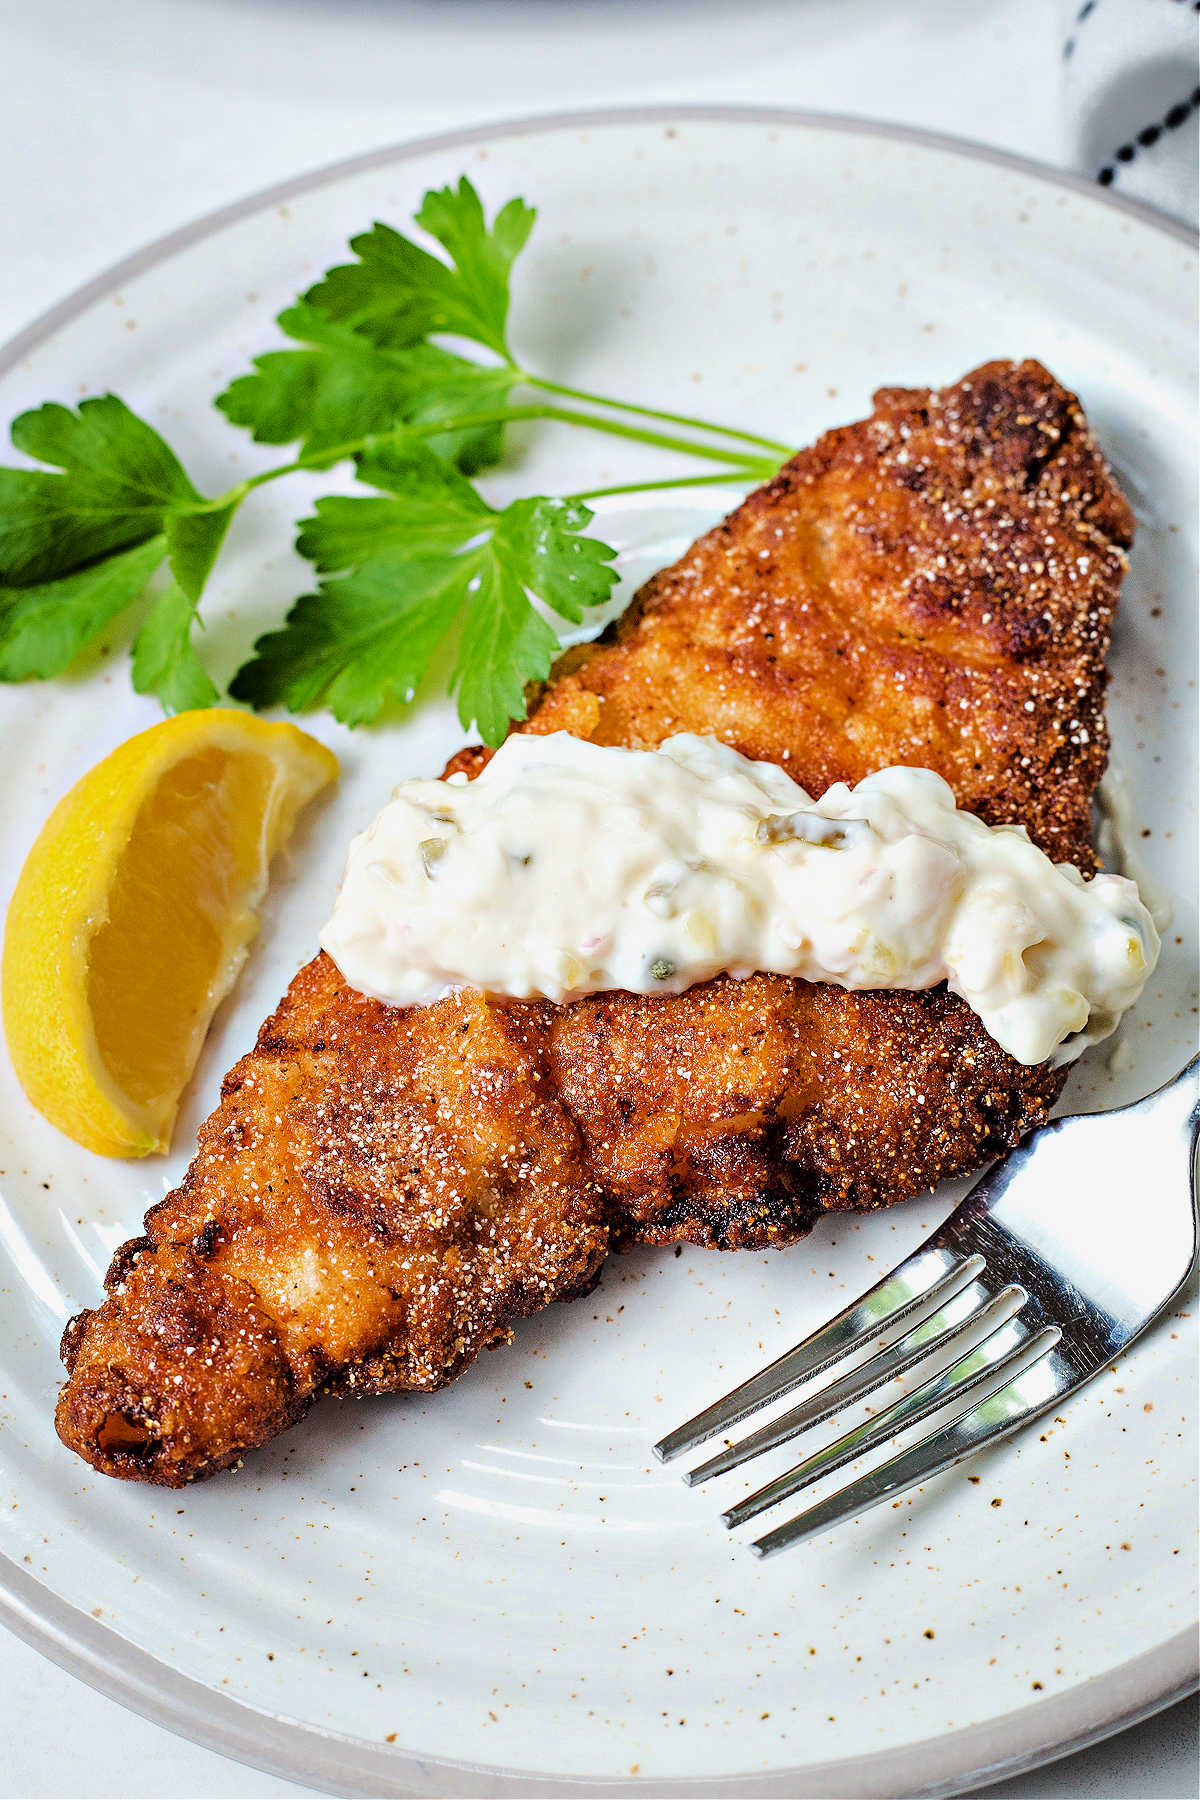 fried catfish on a plate drizzled with tartar sauce.